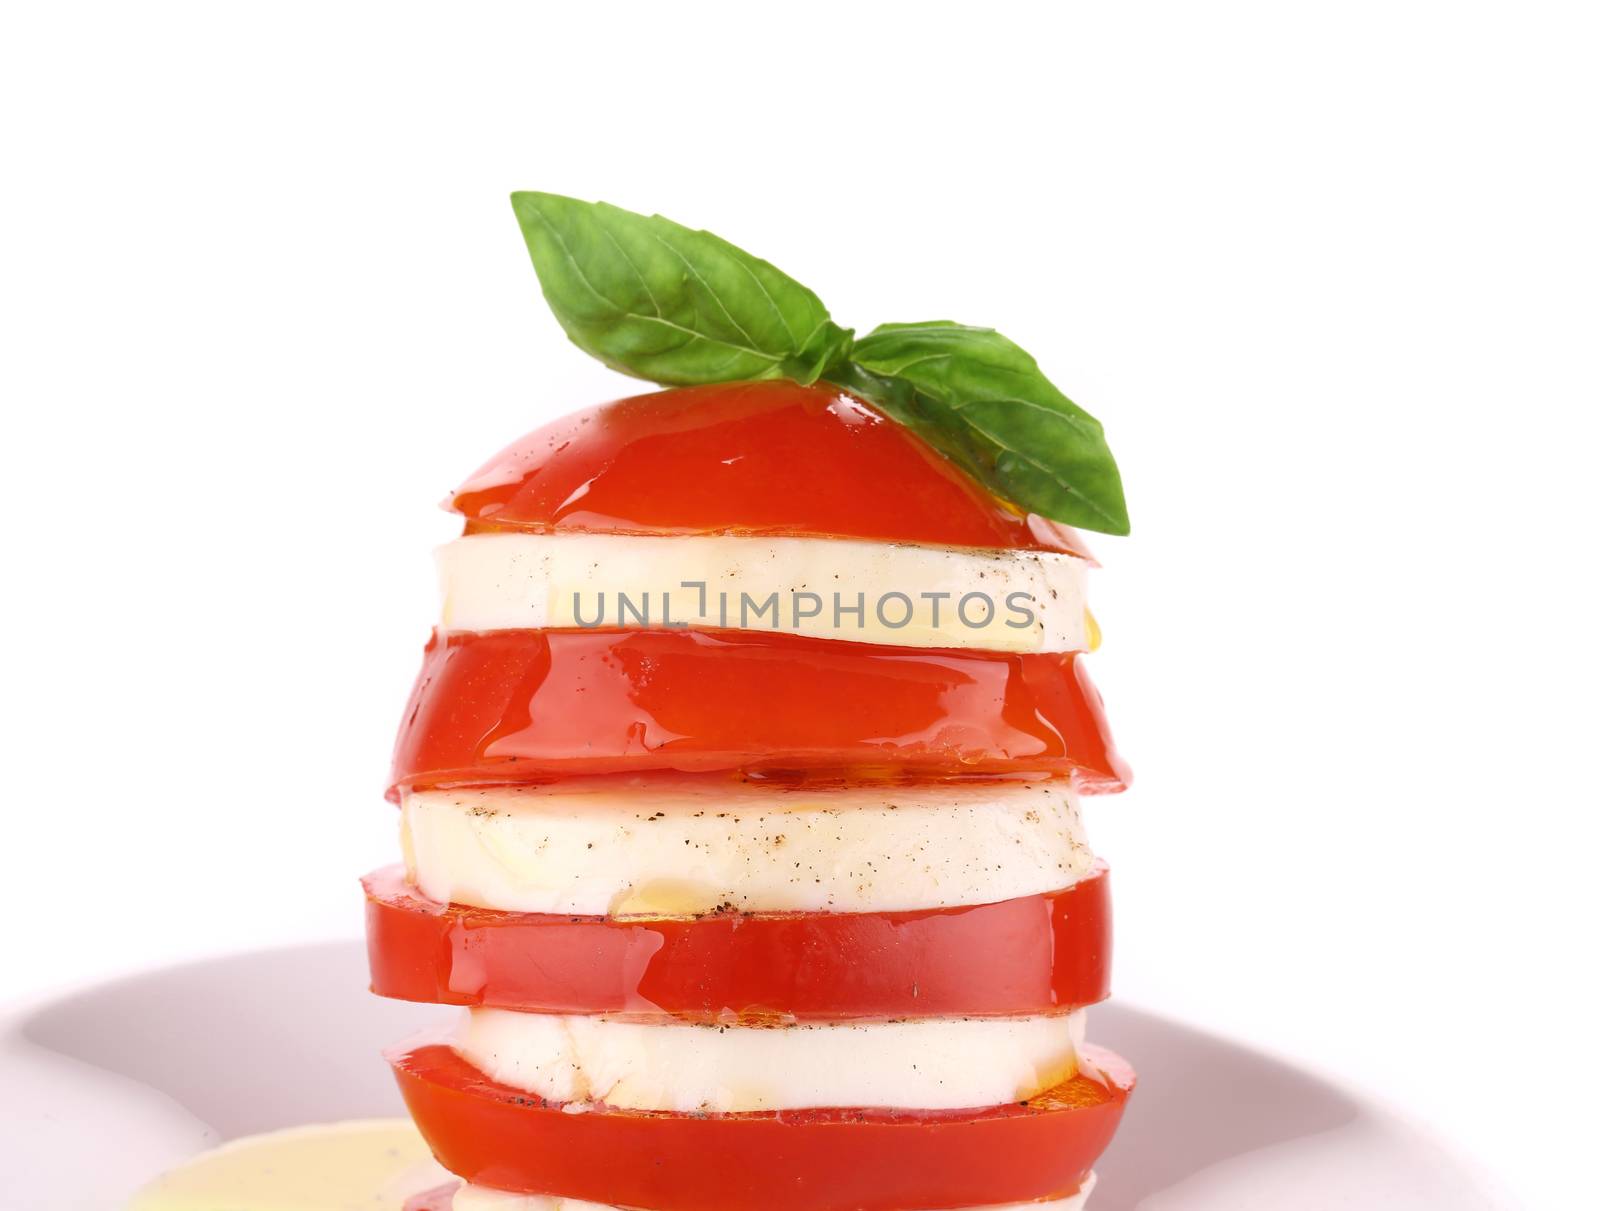 Caprese salad. Isolated on a white background.